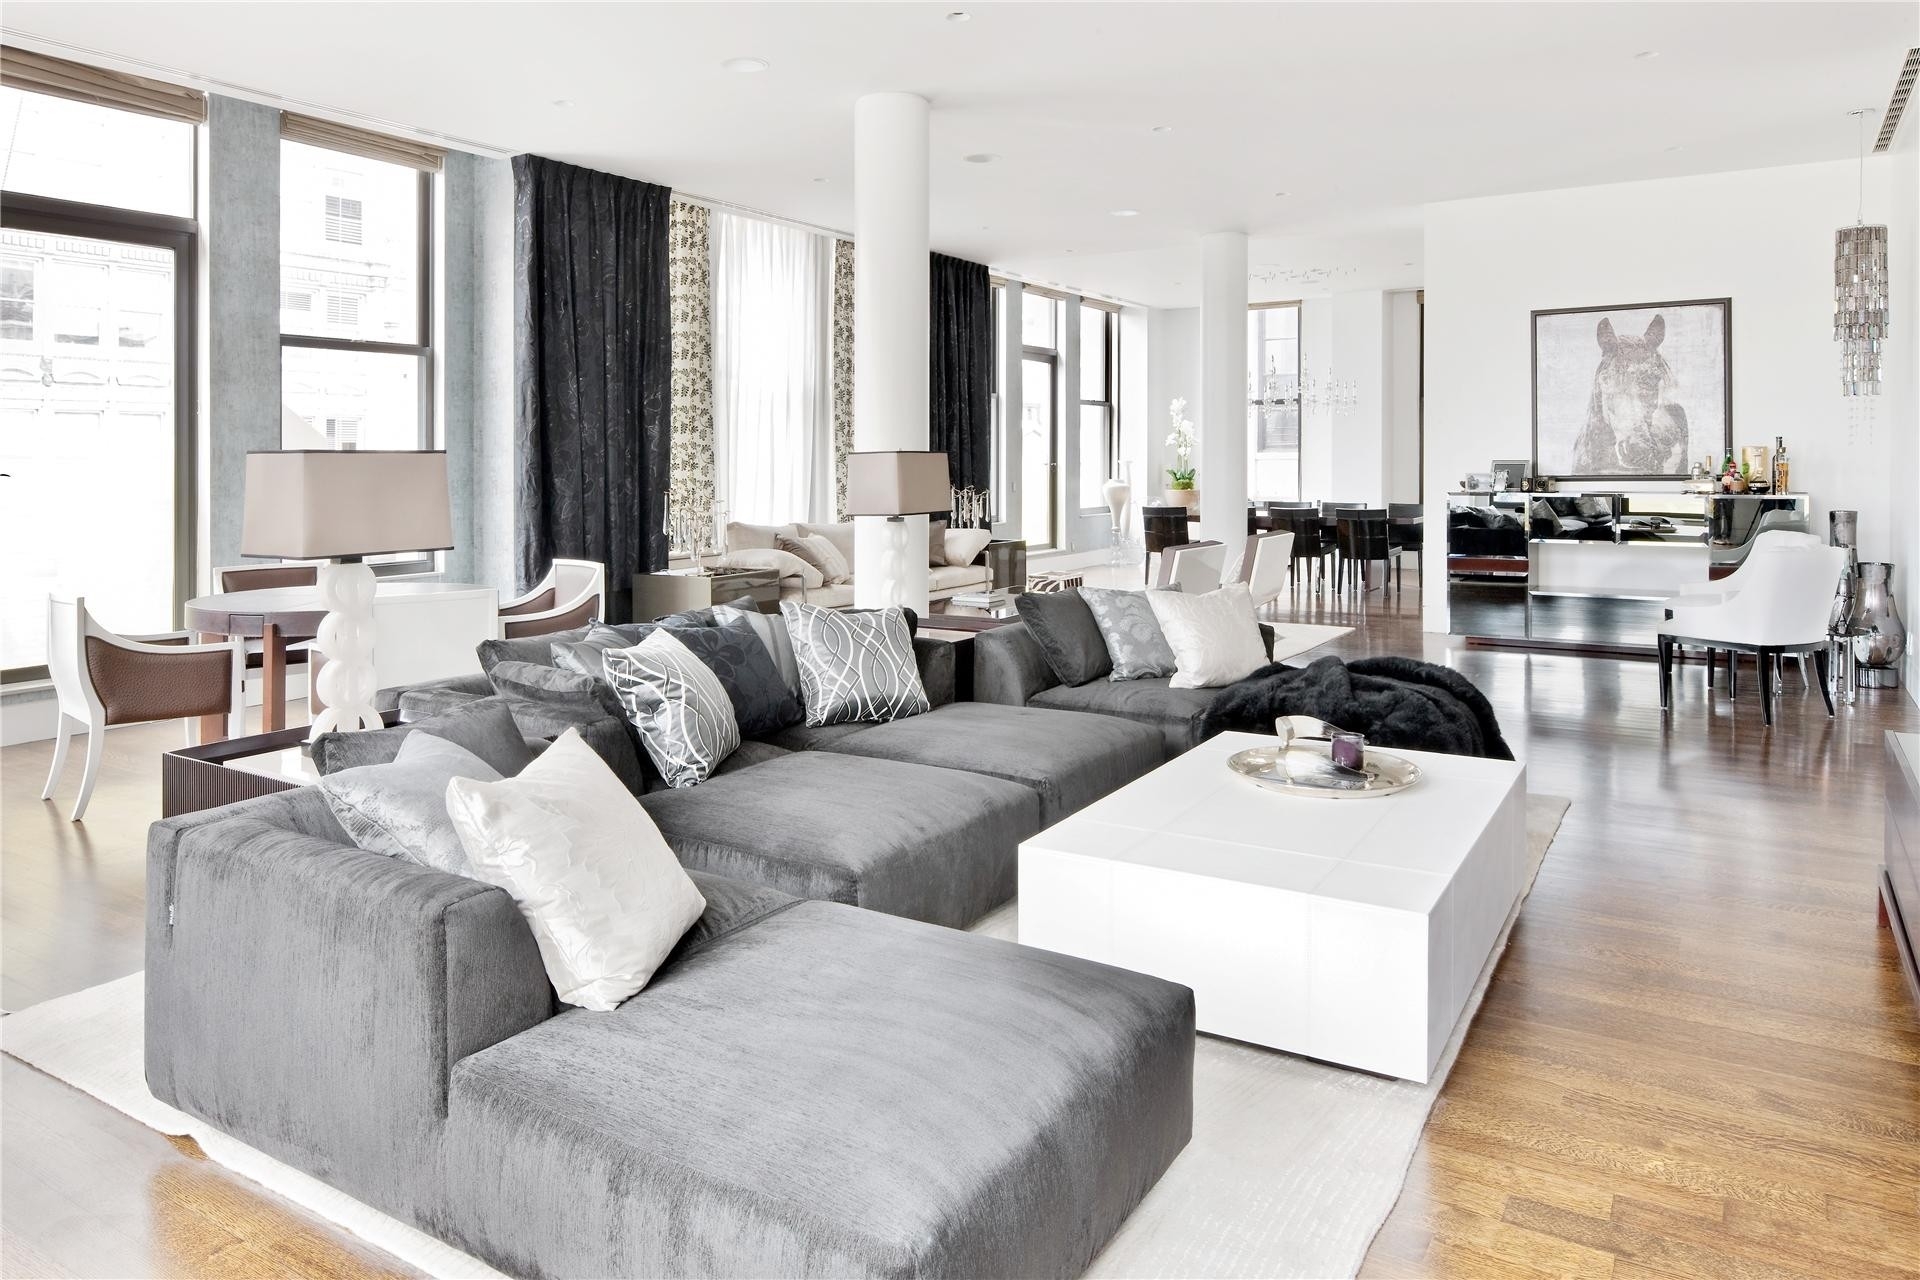 Property at 260 Park Avenue South, PHA New York